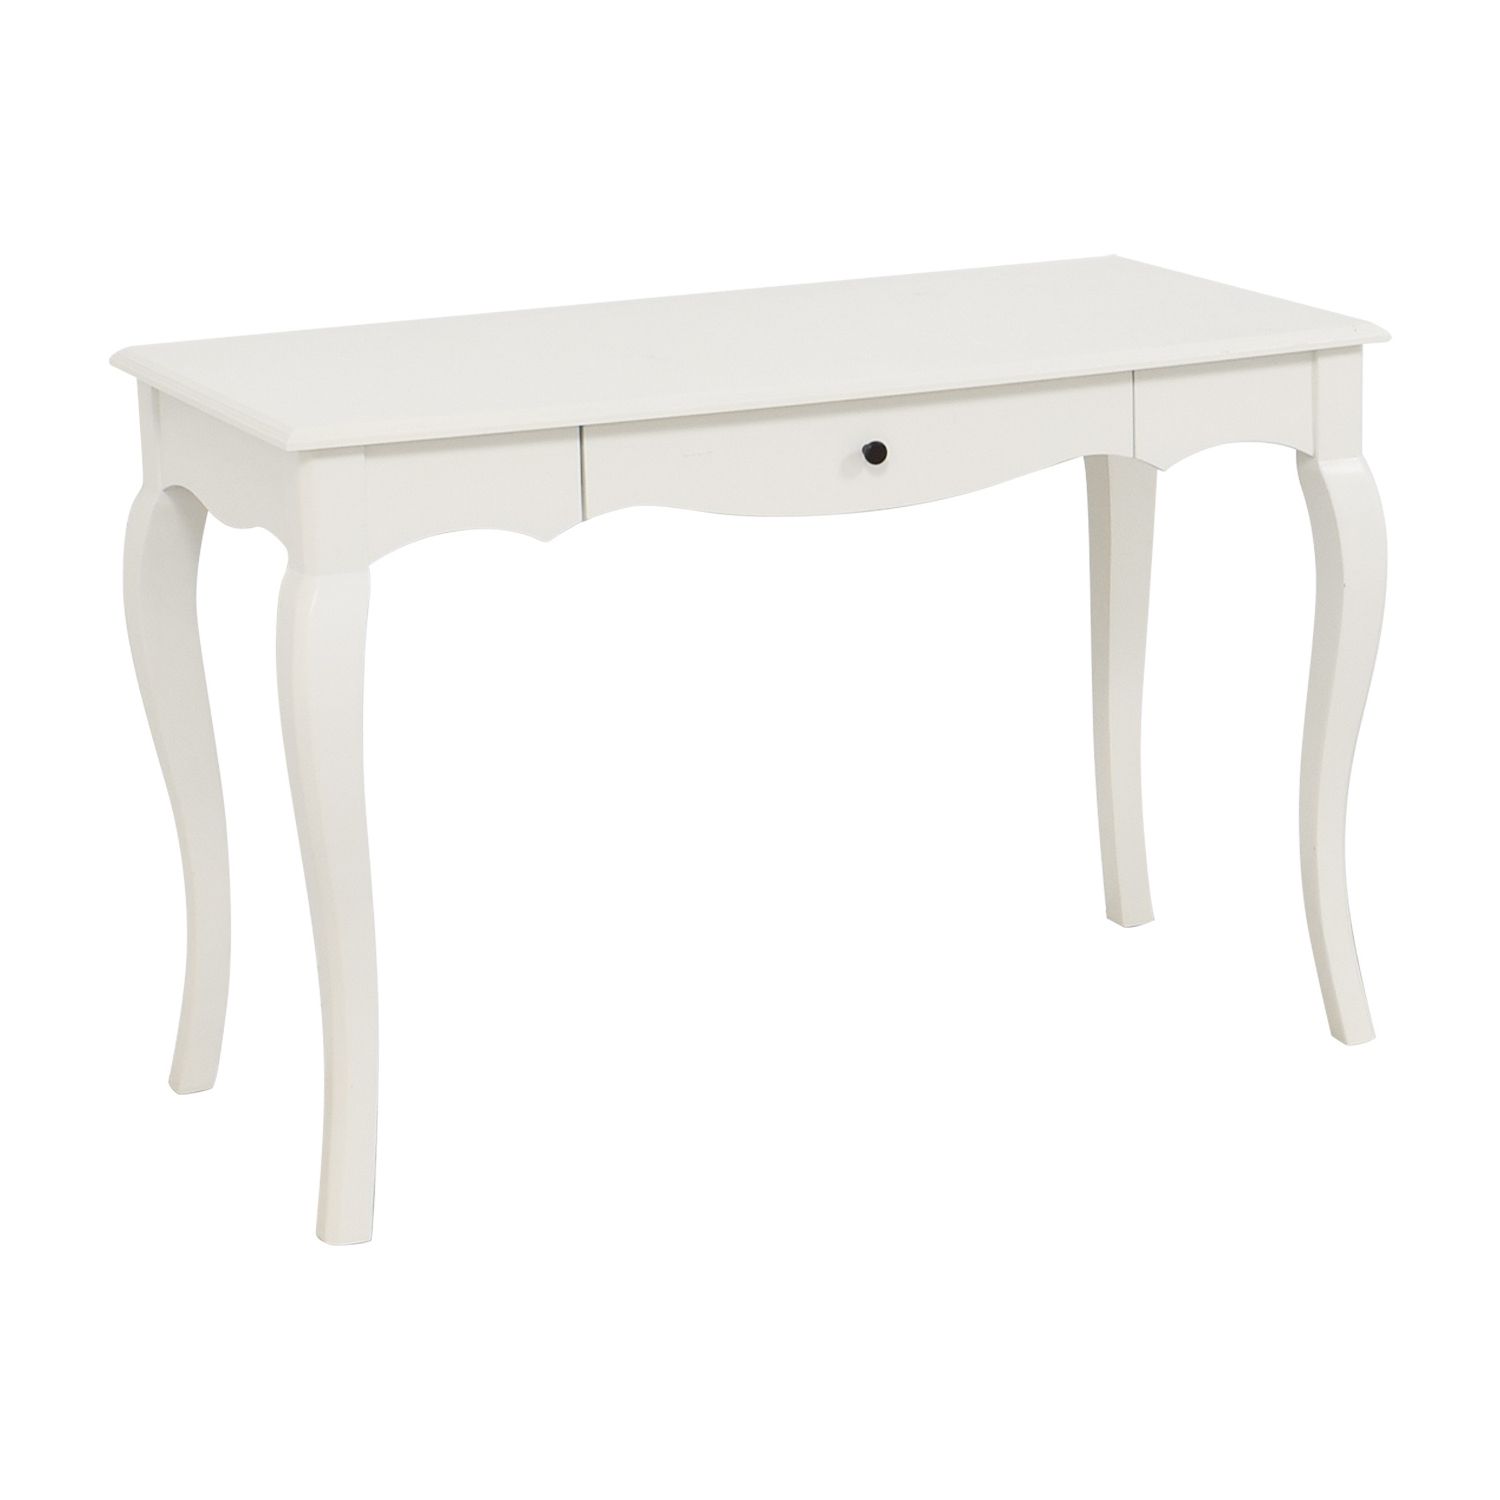 [%70% Off – Pier 1 Pier 1 Toscana Snow White Desk / Tables Pertaining To Widely Used Snow White 1 Drawer Desks|snow White 1 Drawer Desks Within 2018 70% Off – Pier 1 Pier 1 Toscana Snow White Desk / Tables|trendy Snow White 1 Drawer Desks With 70% Off – Pier 1 Pier 1 Toscana Snow White Desk / Tables|favorite 70% Off – Pier 1 Pier 1 Toscana Snow White Desk / Tables Intended For Snow White 1 Drawer Desks%] (View 15 of 15)